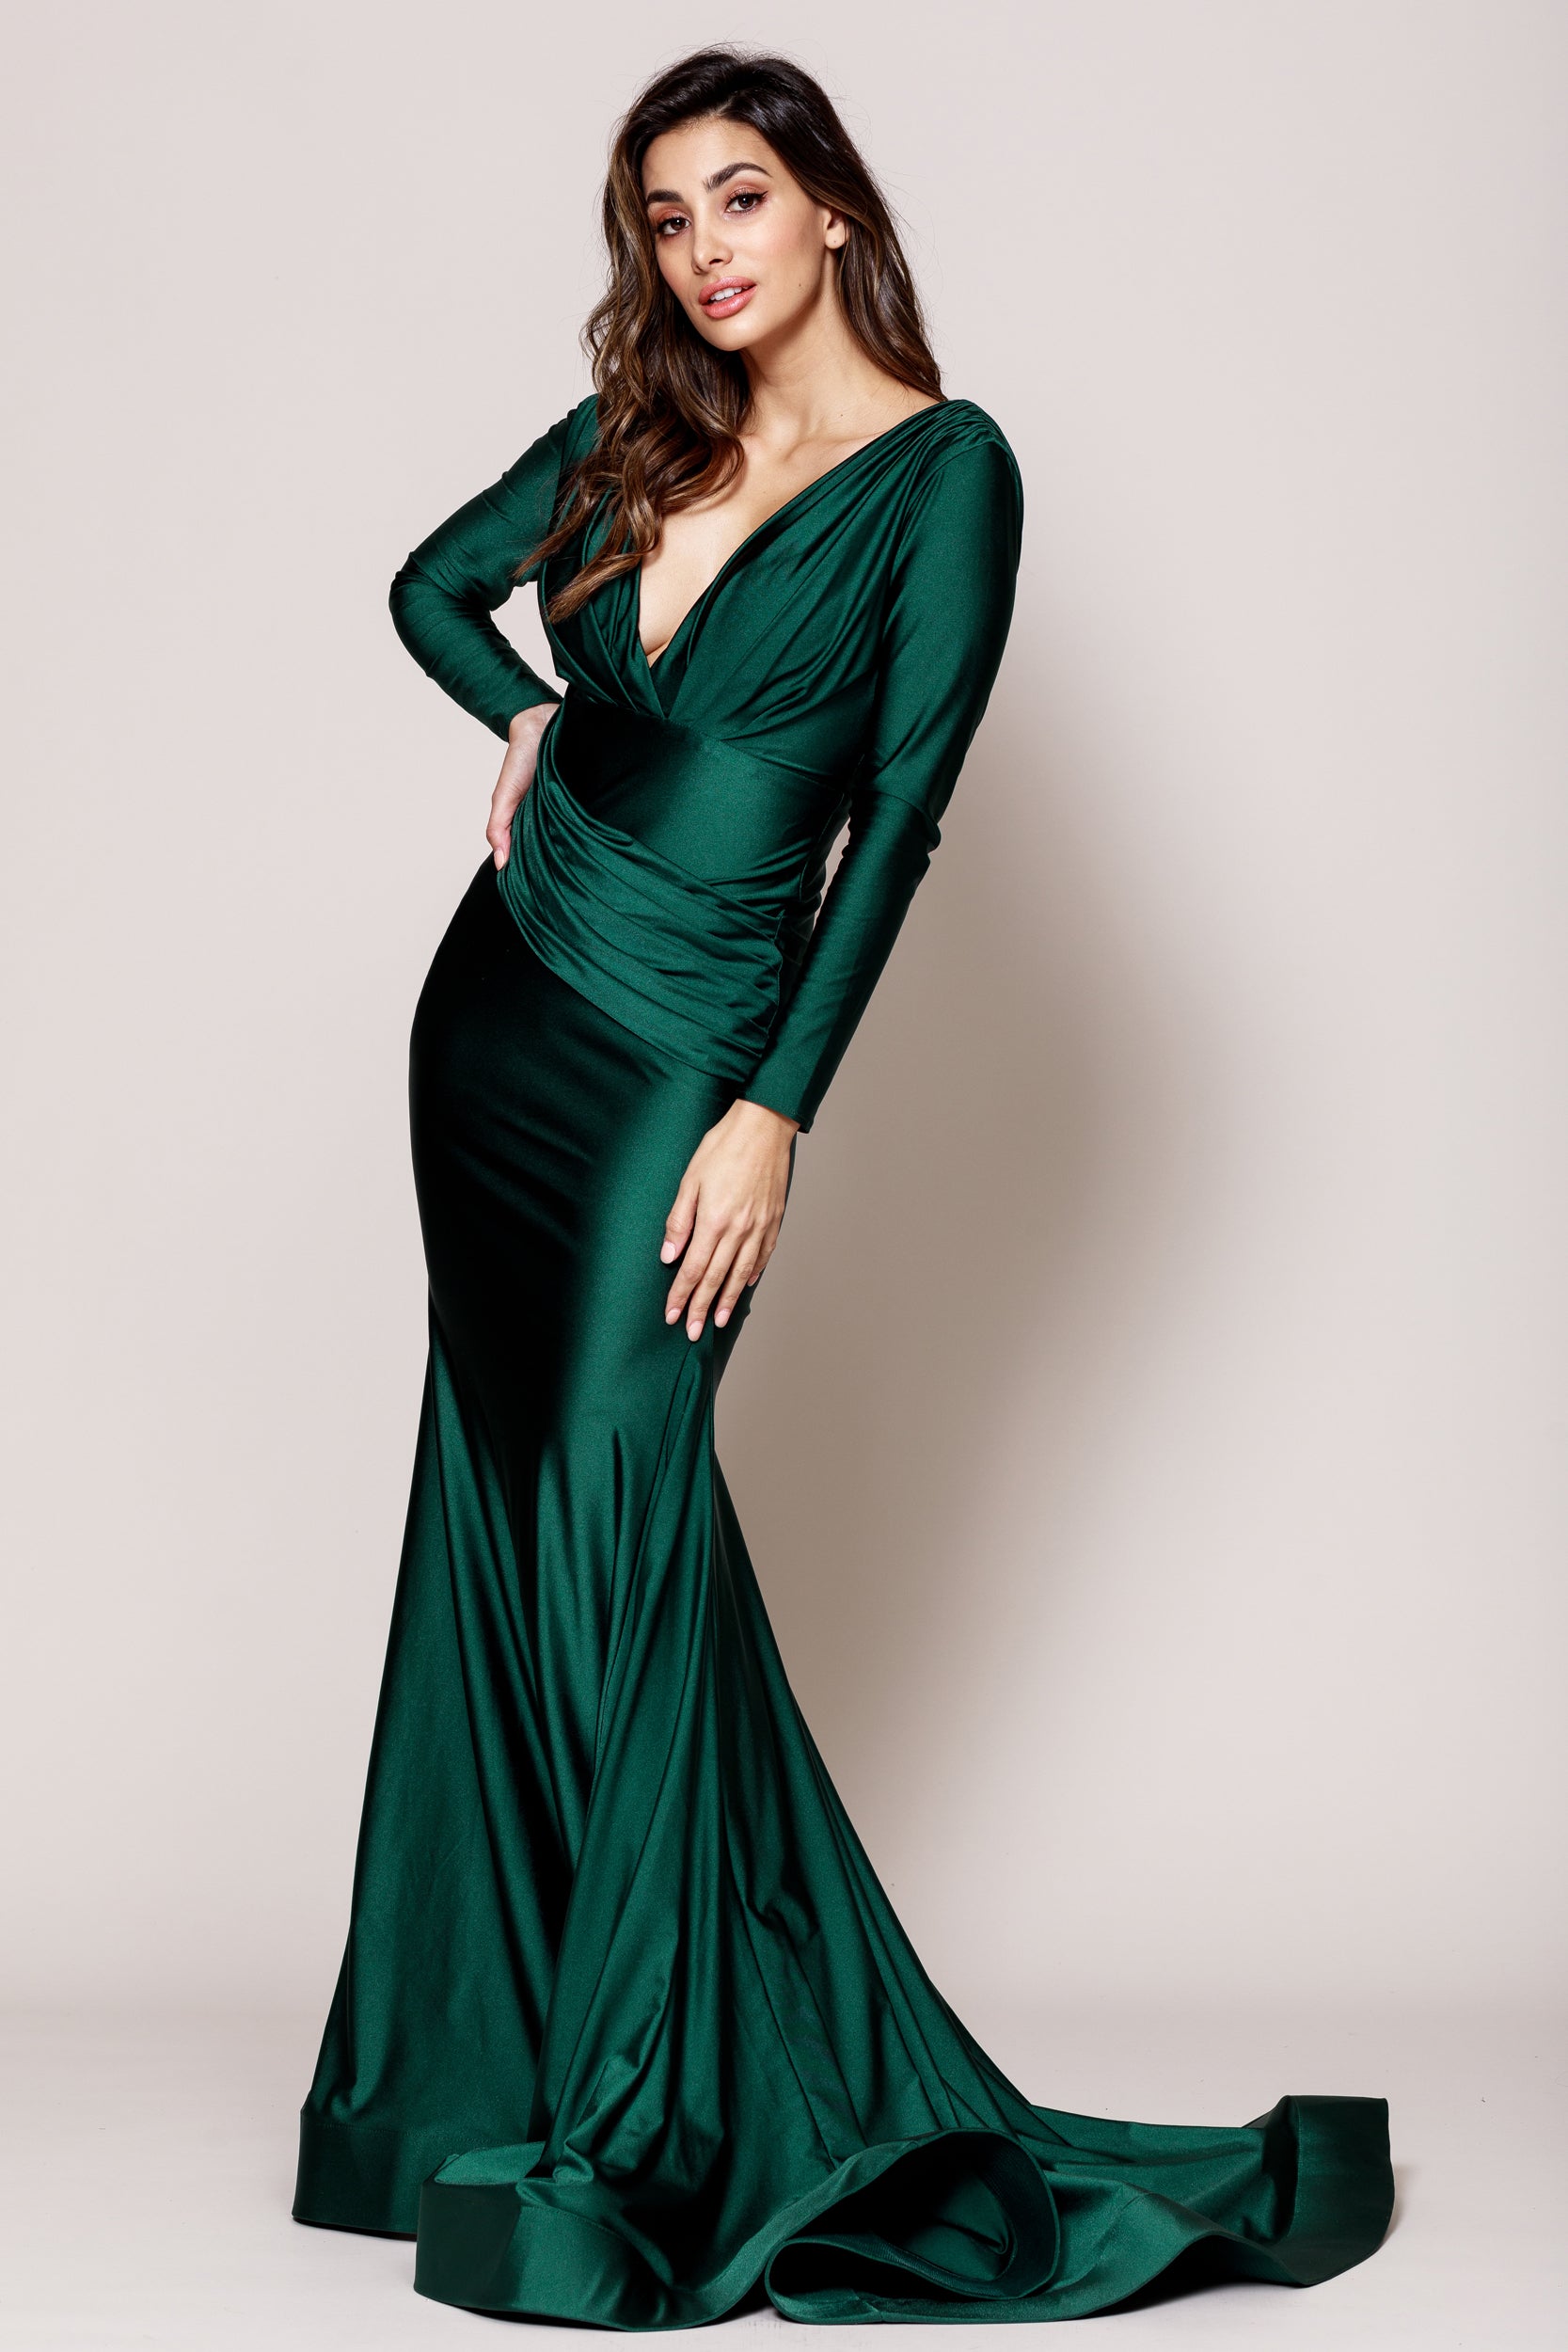 Image of V Neck Rouched Formal Dress With Long Sleeves in Emerald Green